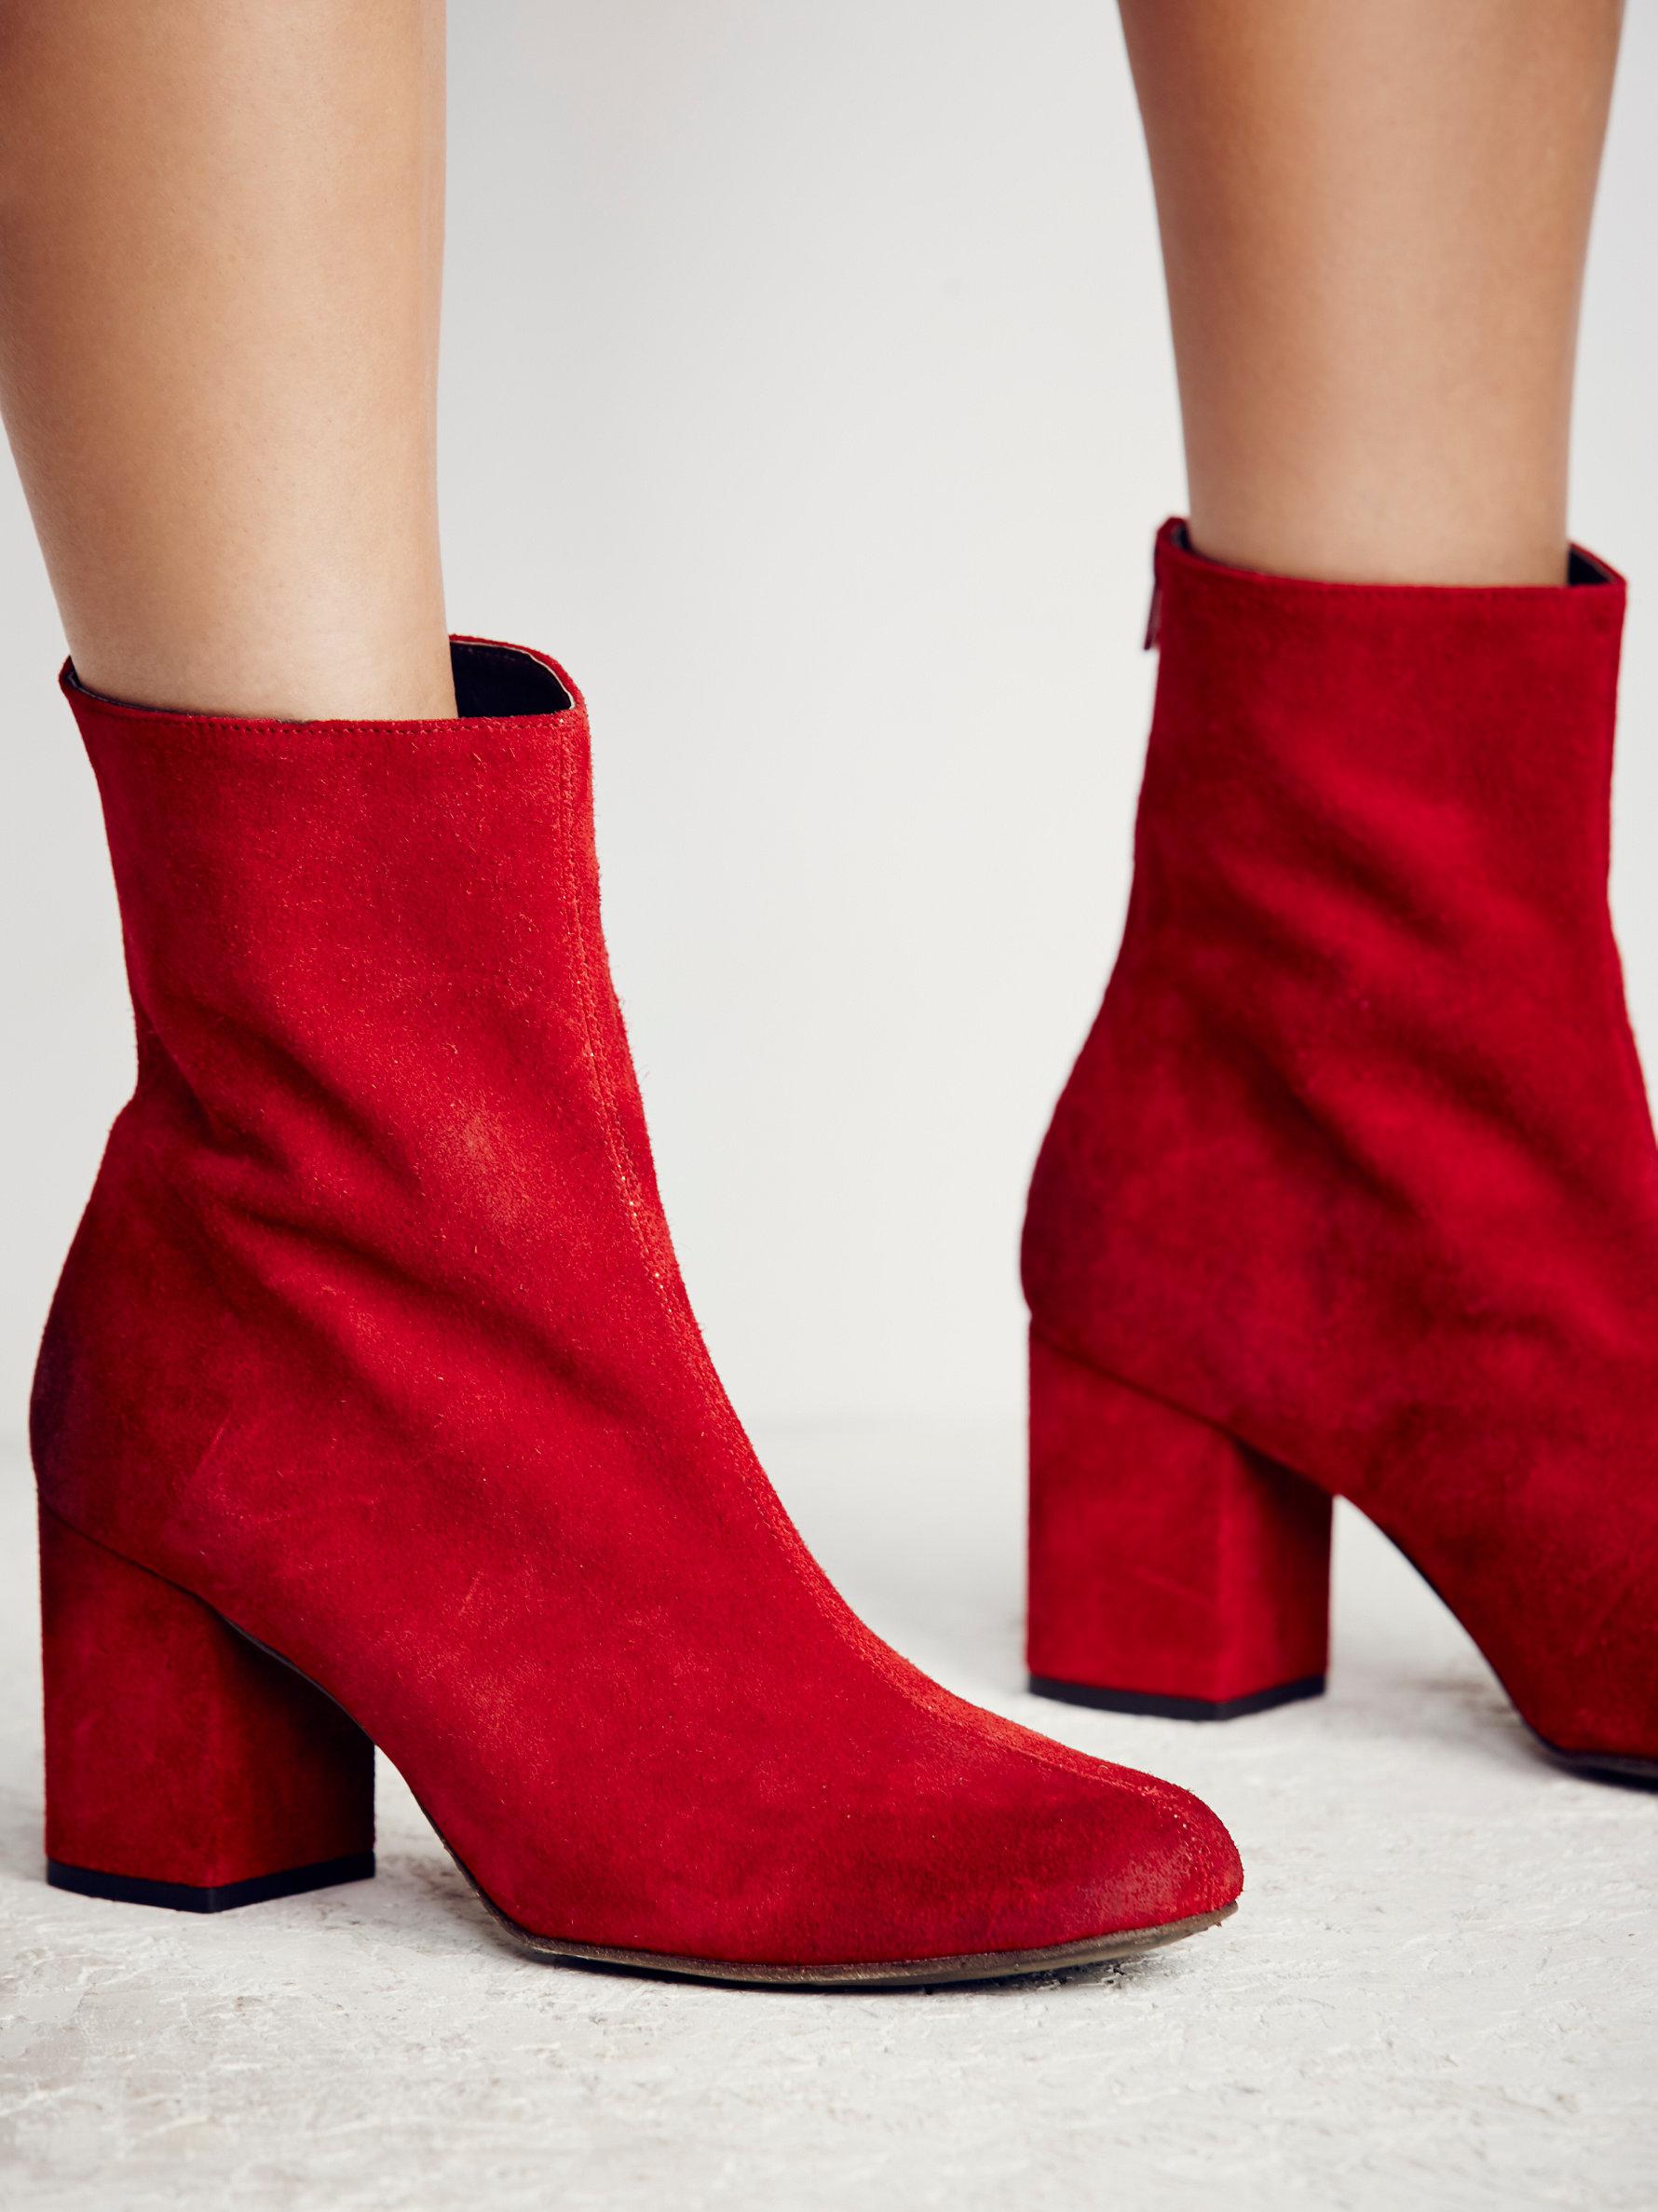 Lyst - Free people Cecile Ankle Boot in Red